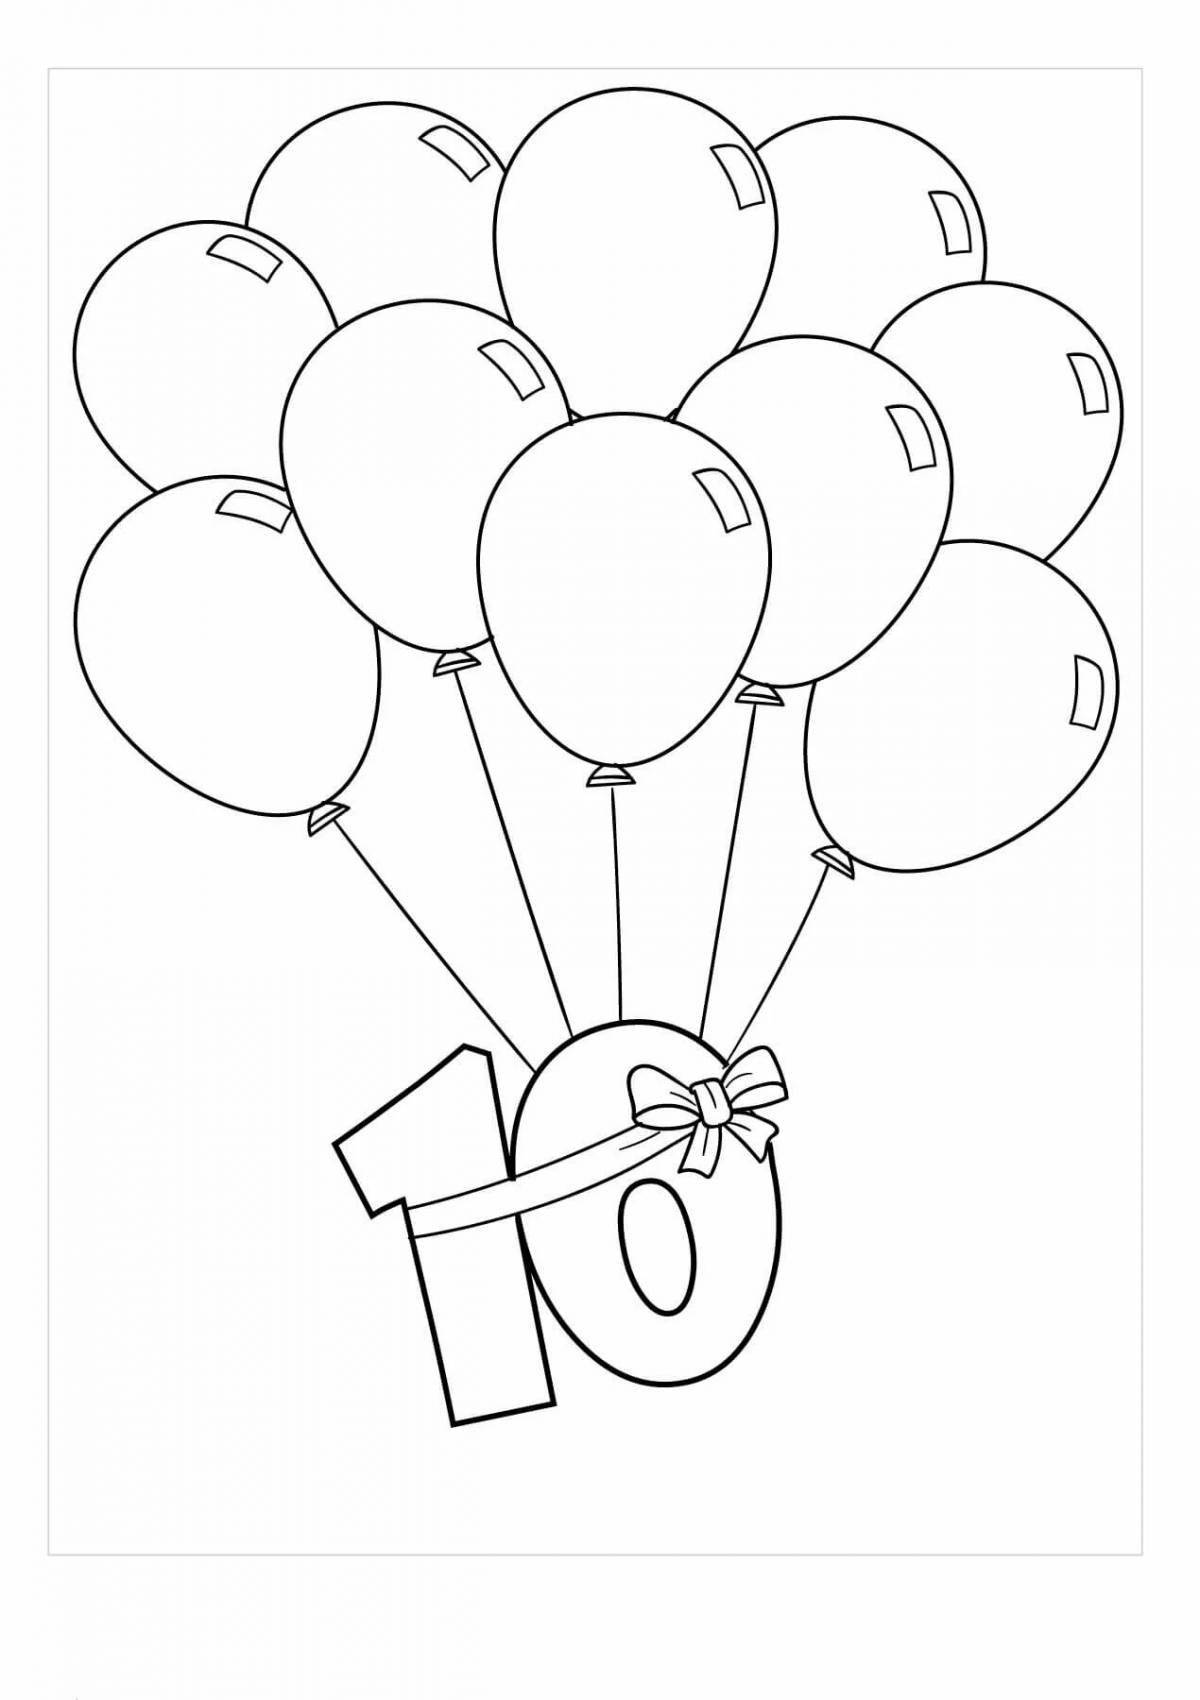 Fun ball coloring book for 4-5 year olds